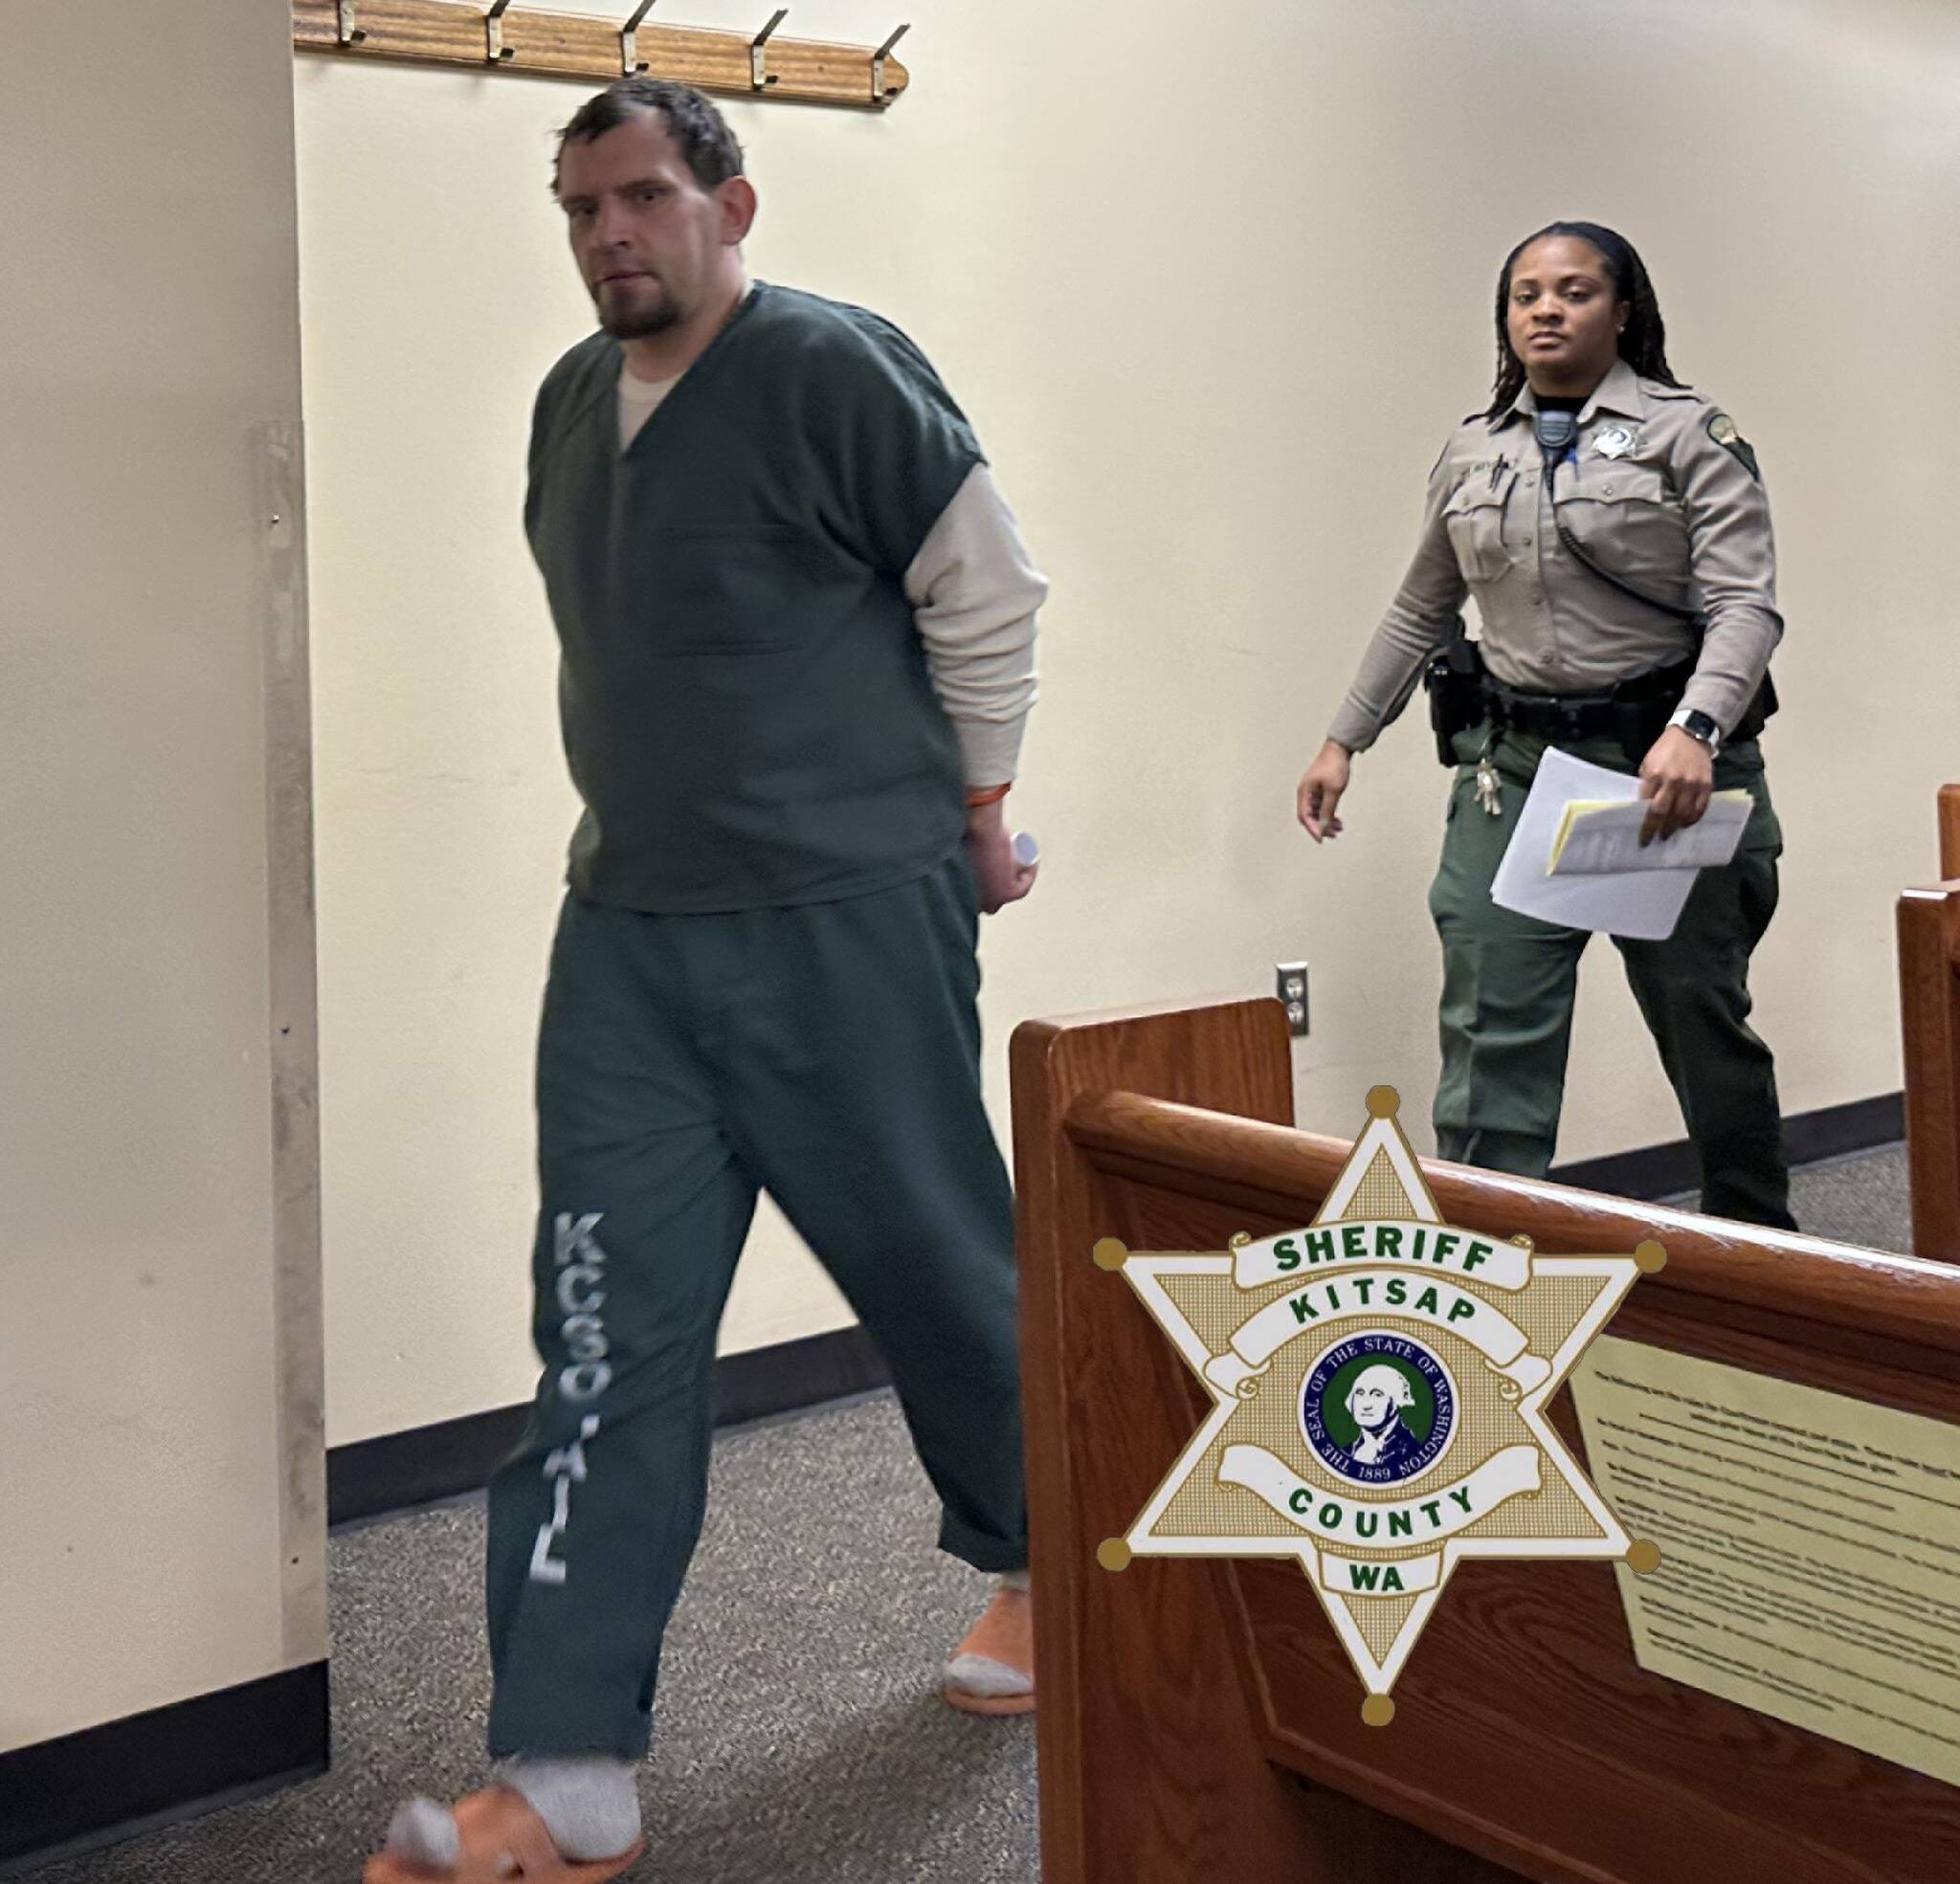 Shaun Rose walks handcuffed through the courtroom accompanied by law enforcement. Kitsap County Sheriff’s Office courtesy photo